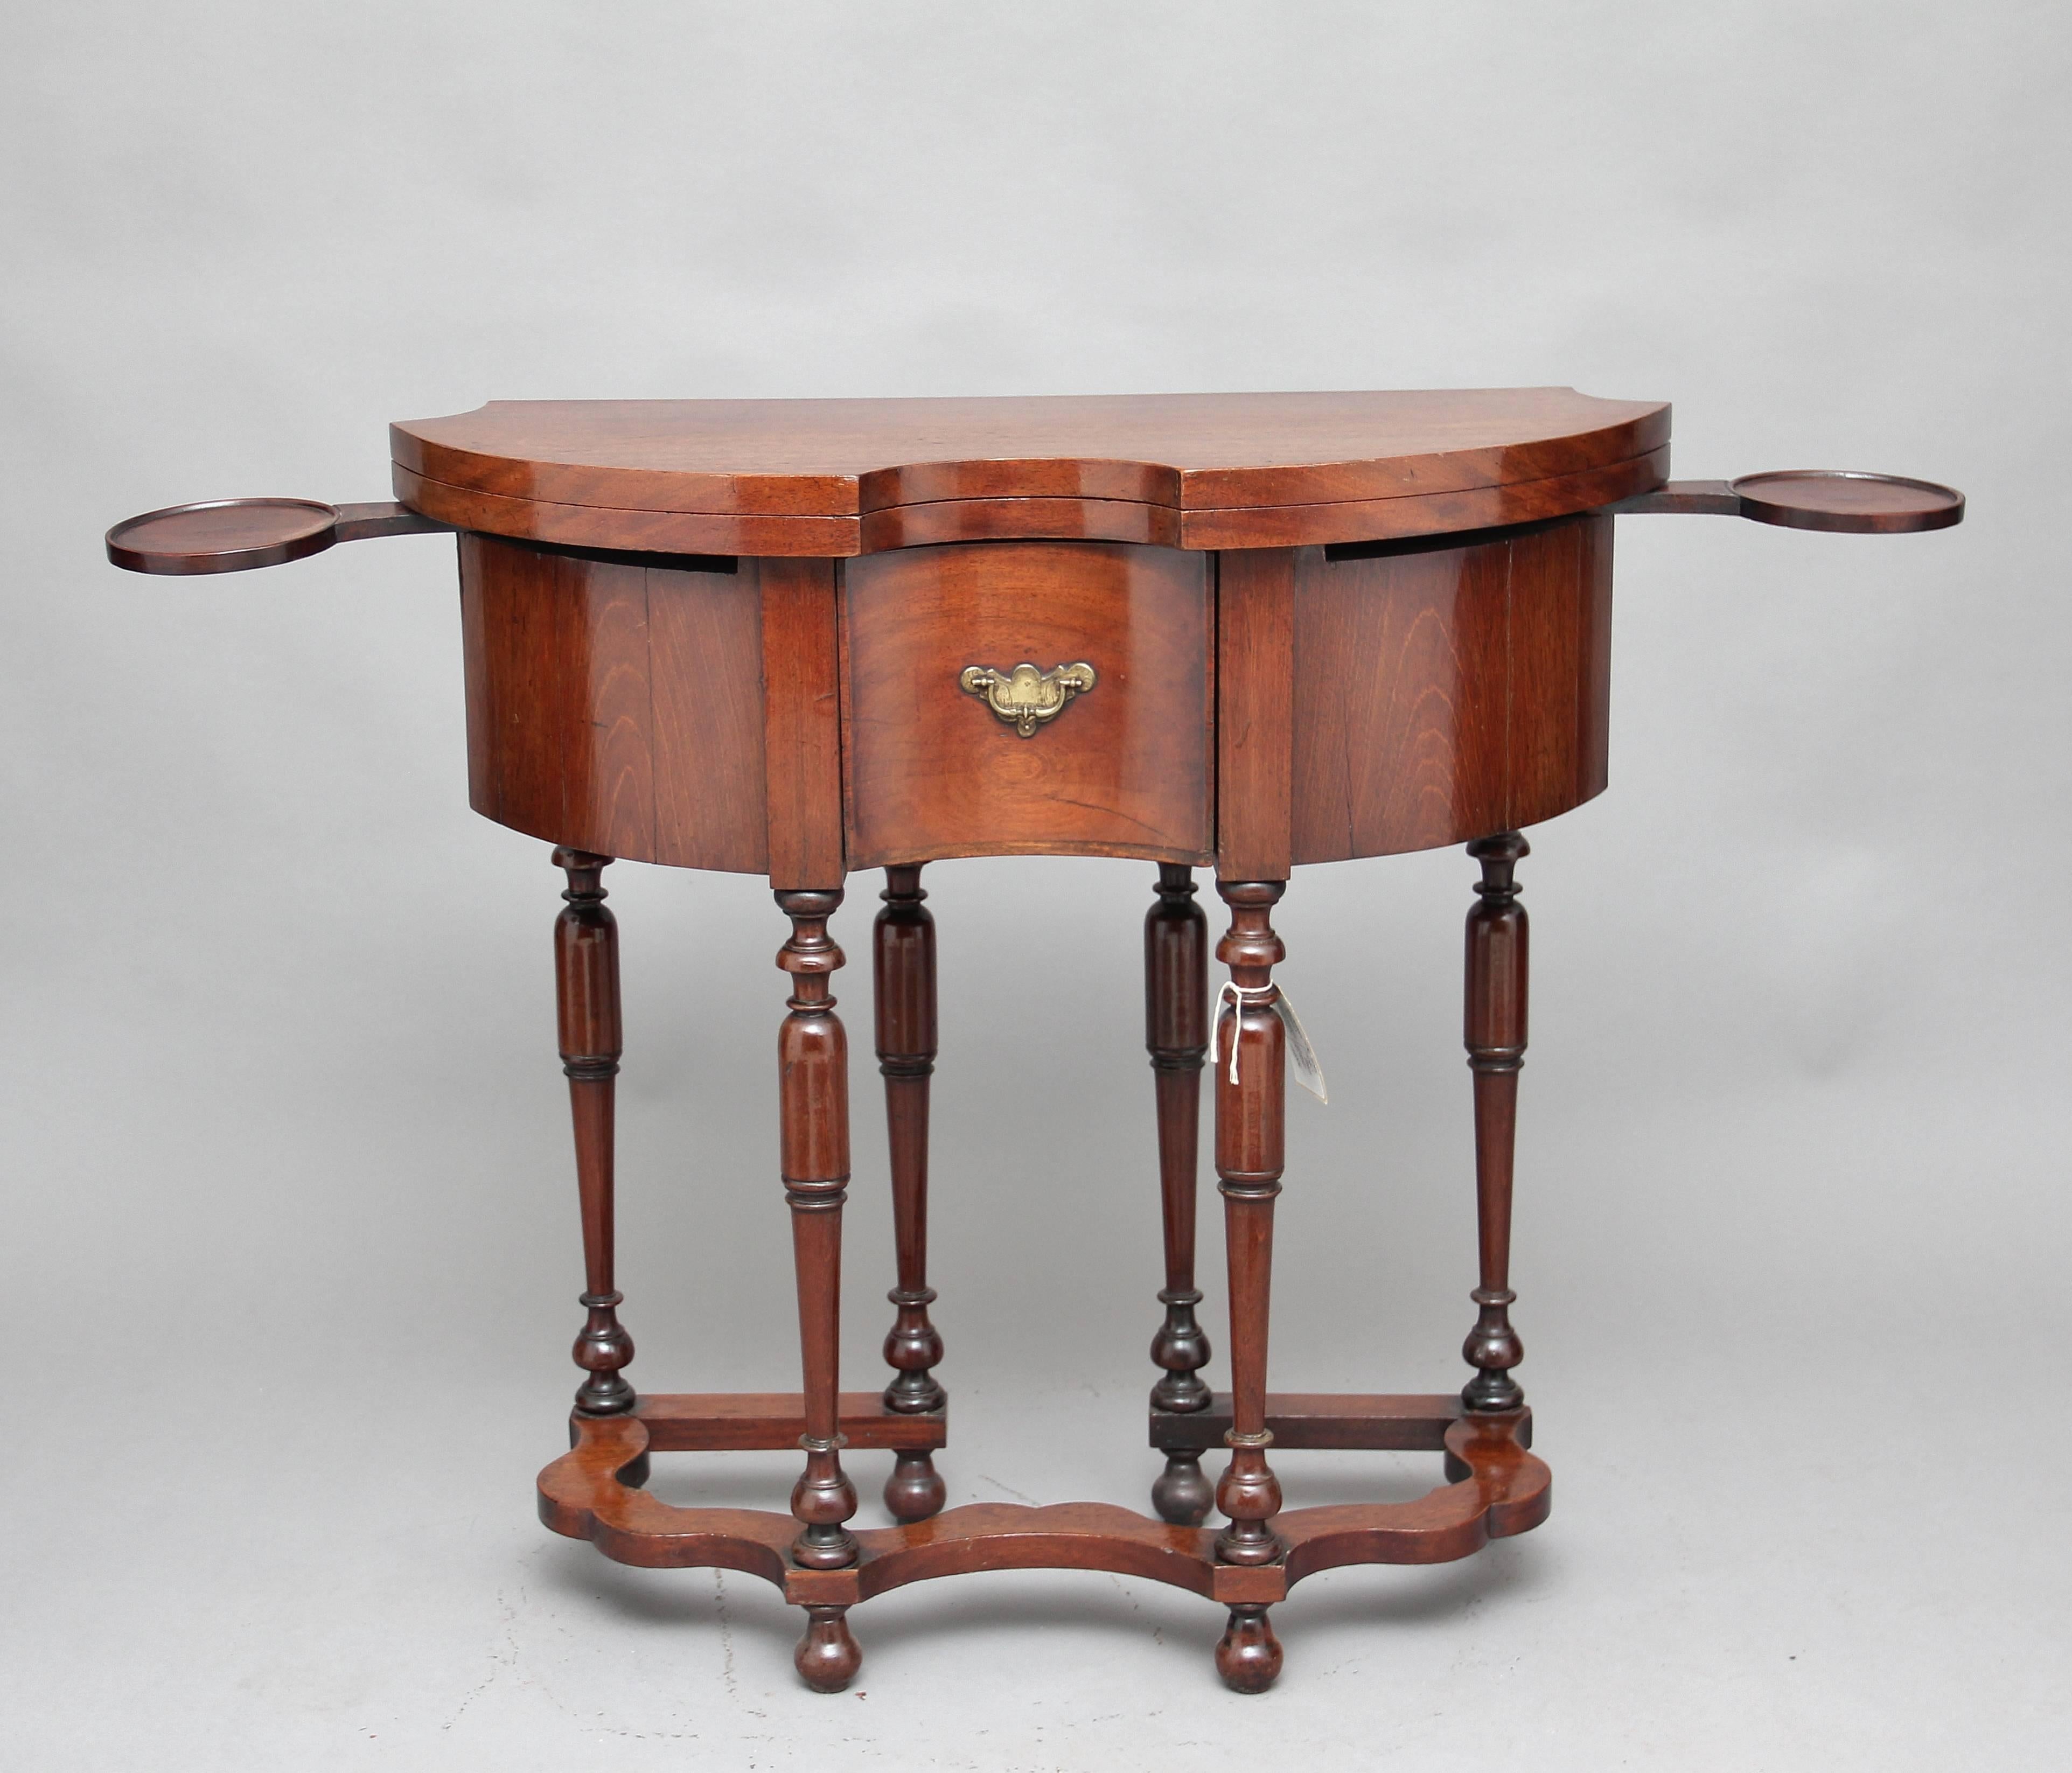 A very rare mid-18th century teak games table, the shaped hinged fold over top above a deep shaped apron with a single oak lined drawer in the centre with original brass plate handle, supported on six elegant turned legs united by a shaped stretcher